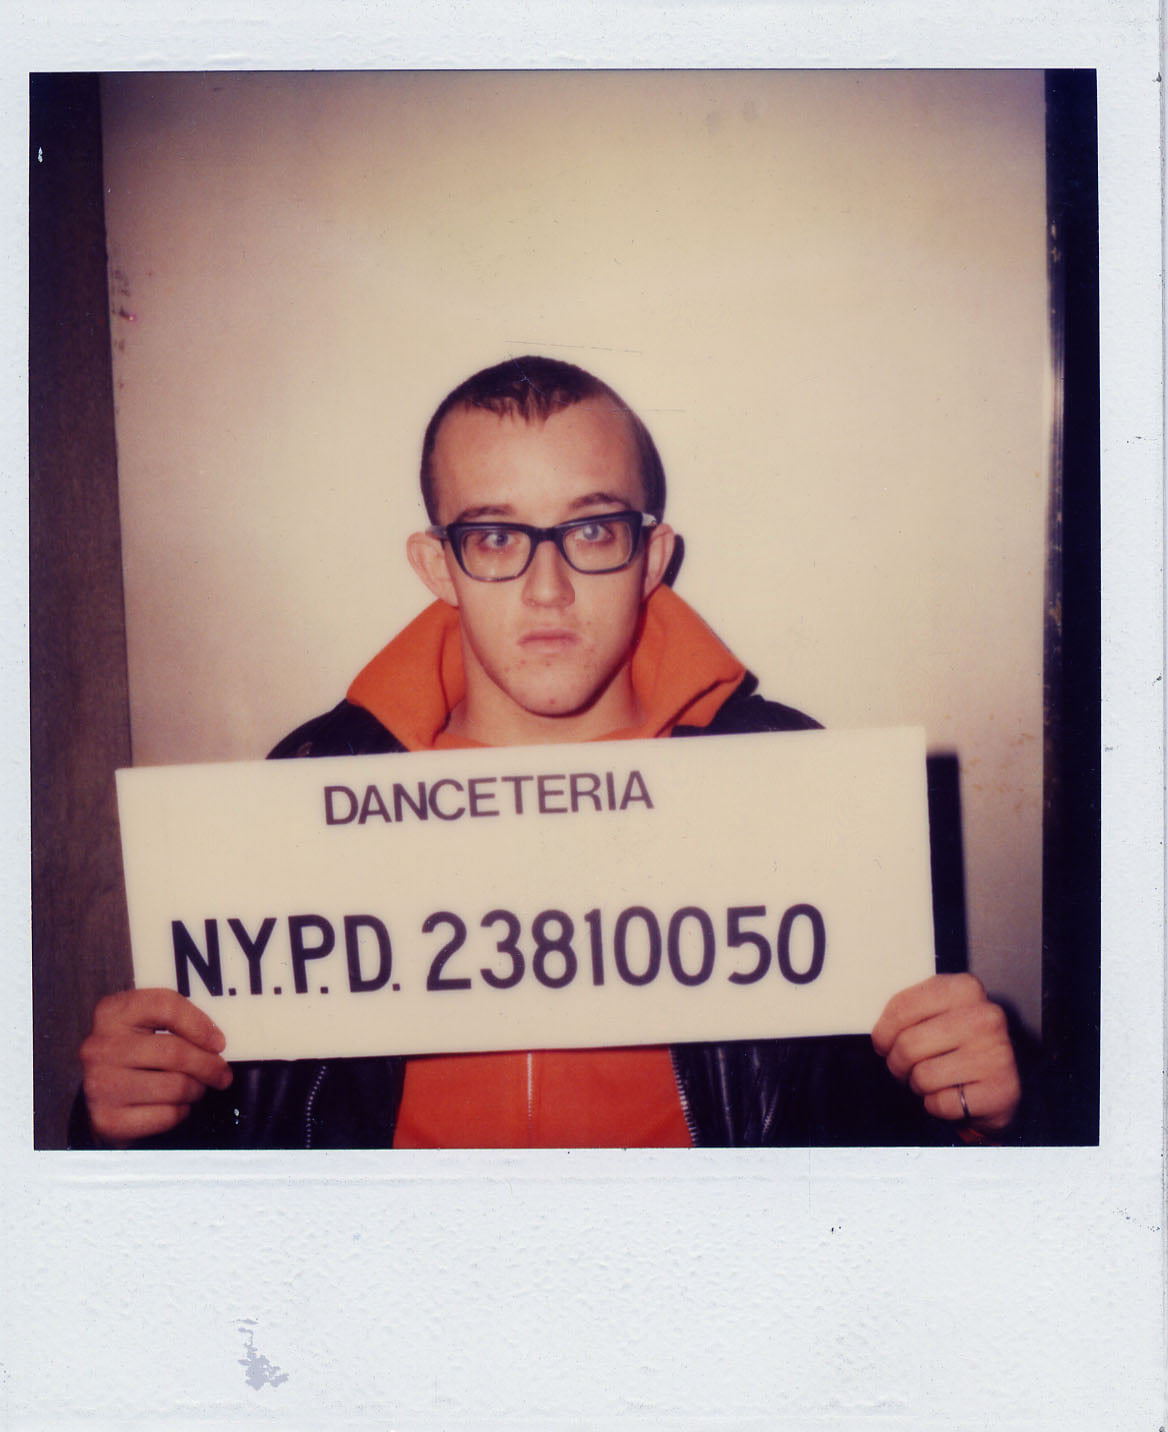 Keith Haring in a mock mugshot after Danceteria bust, 1980 (Photographer unknown).